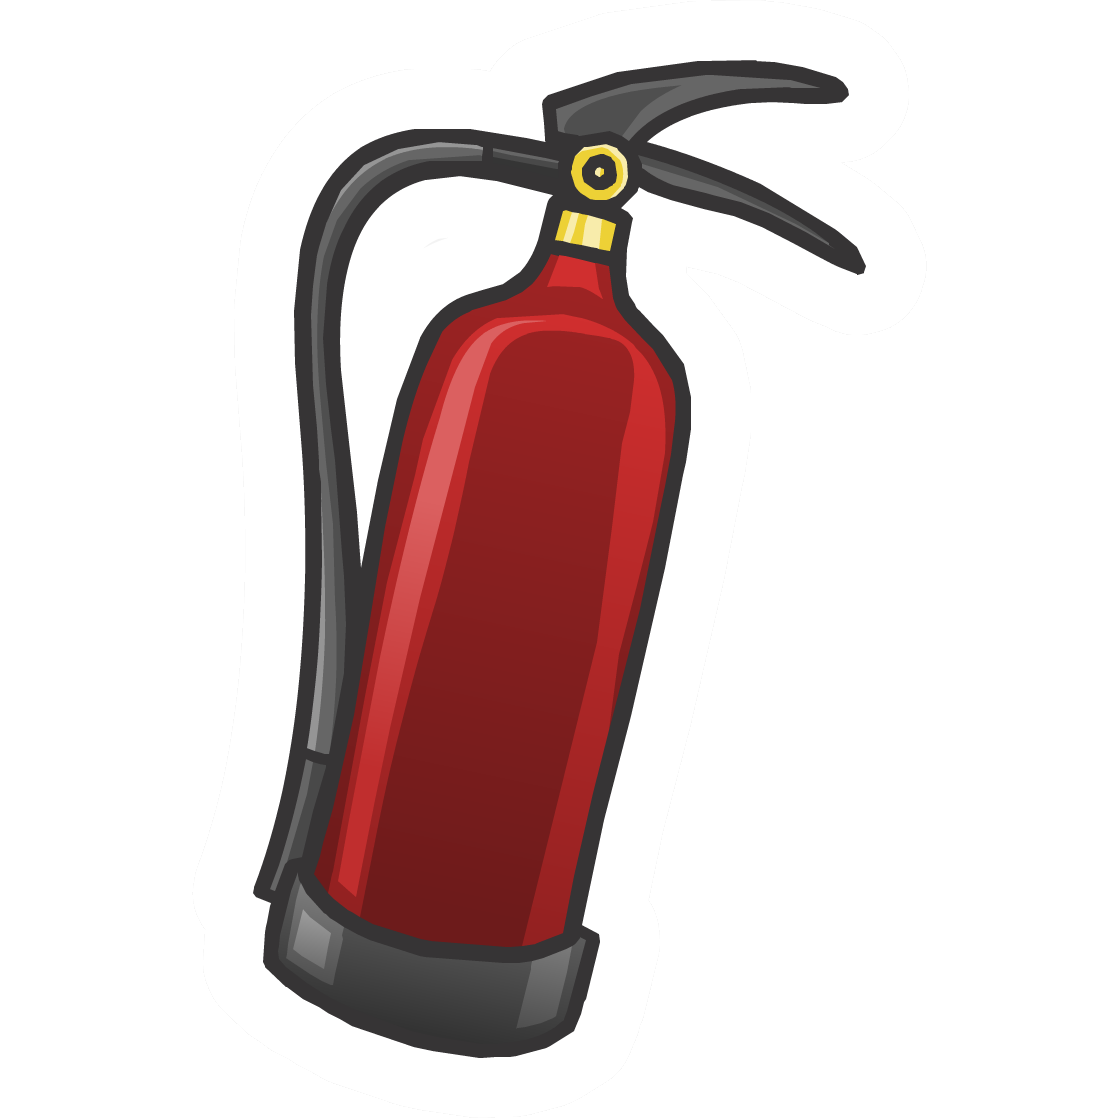 Fire Extinguisher Images ClipArt Best